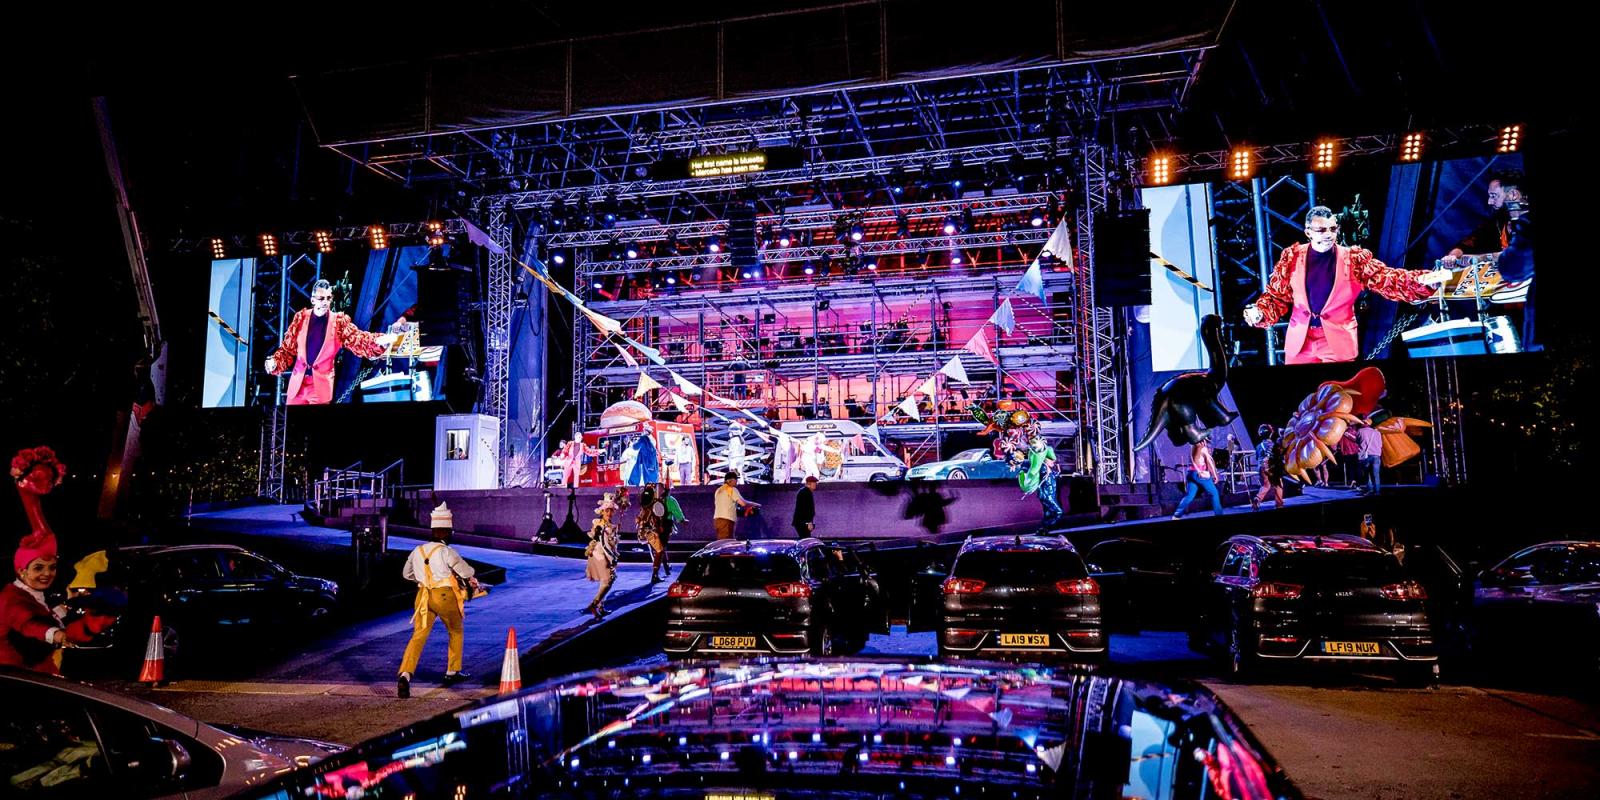 The Drive & Live car park and stage with Marcello on screens flanking the stage.